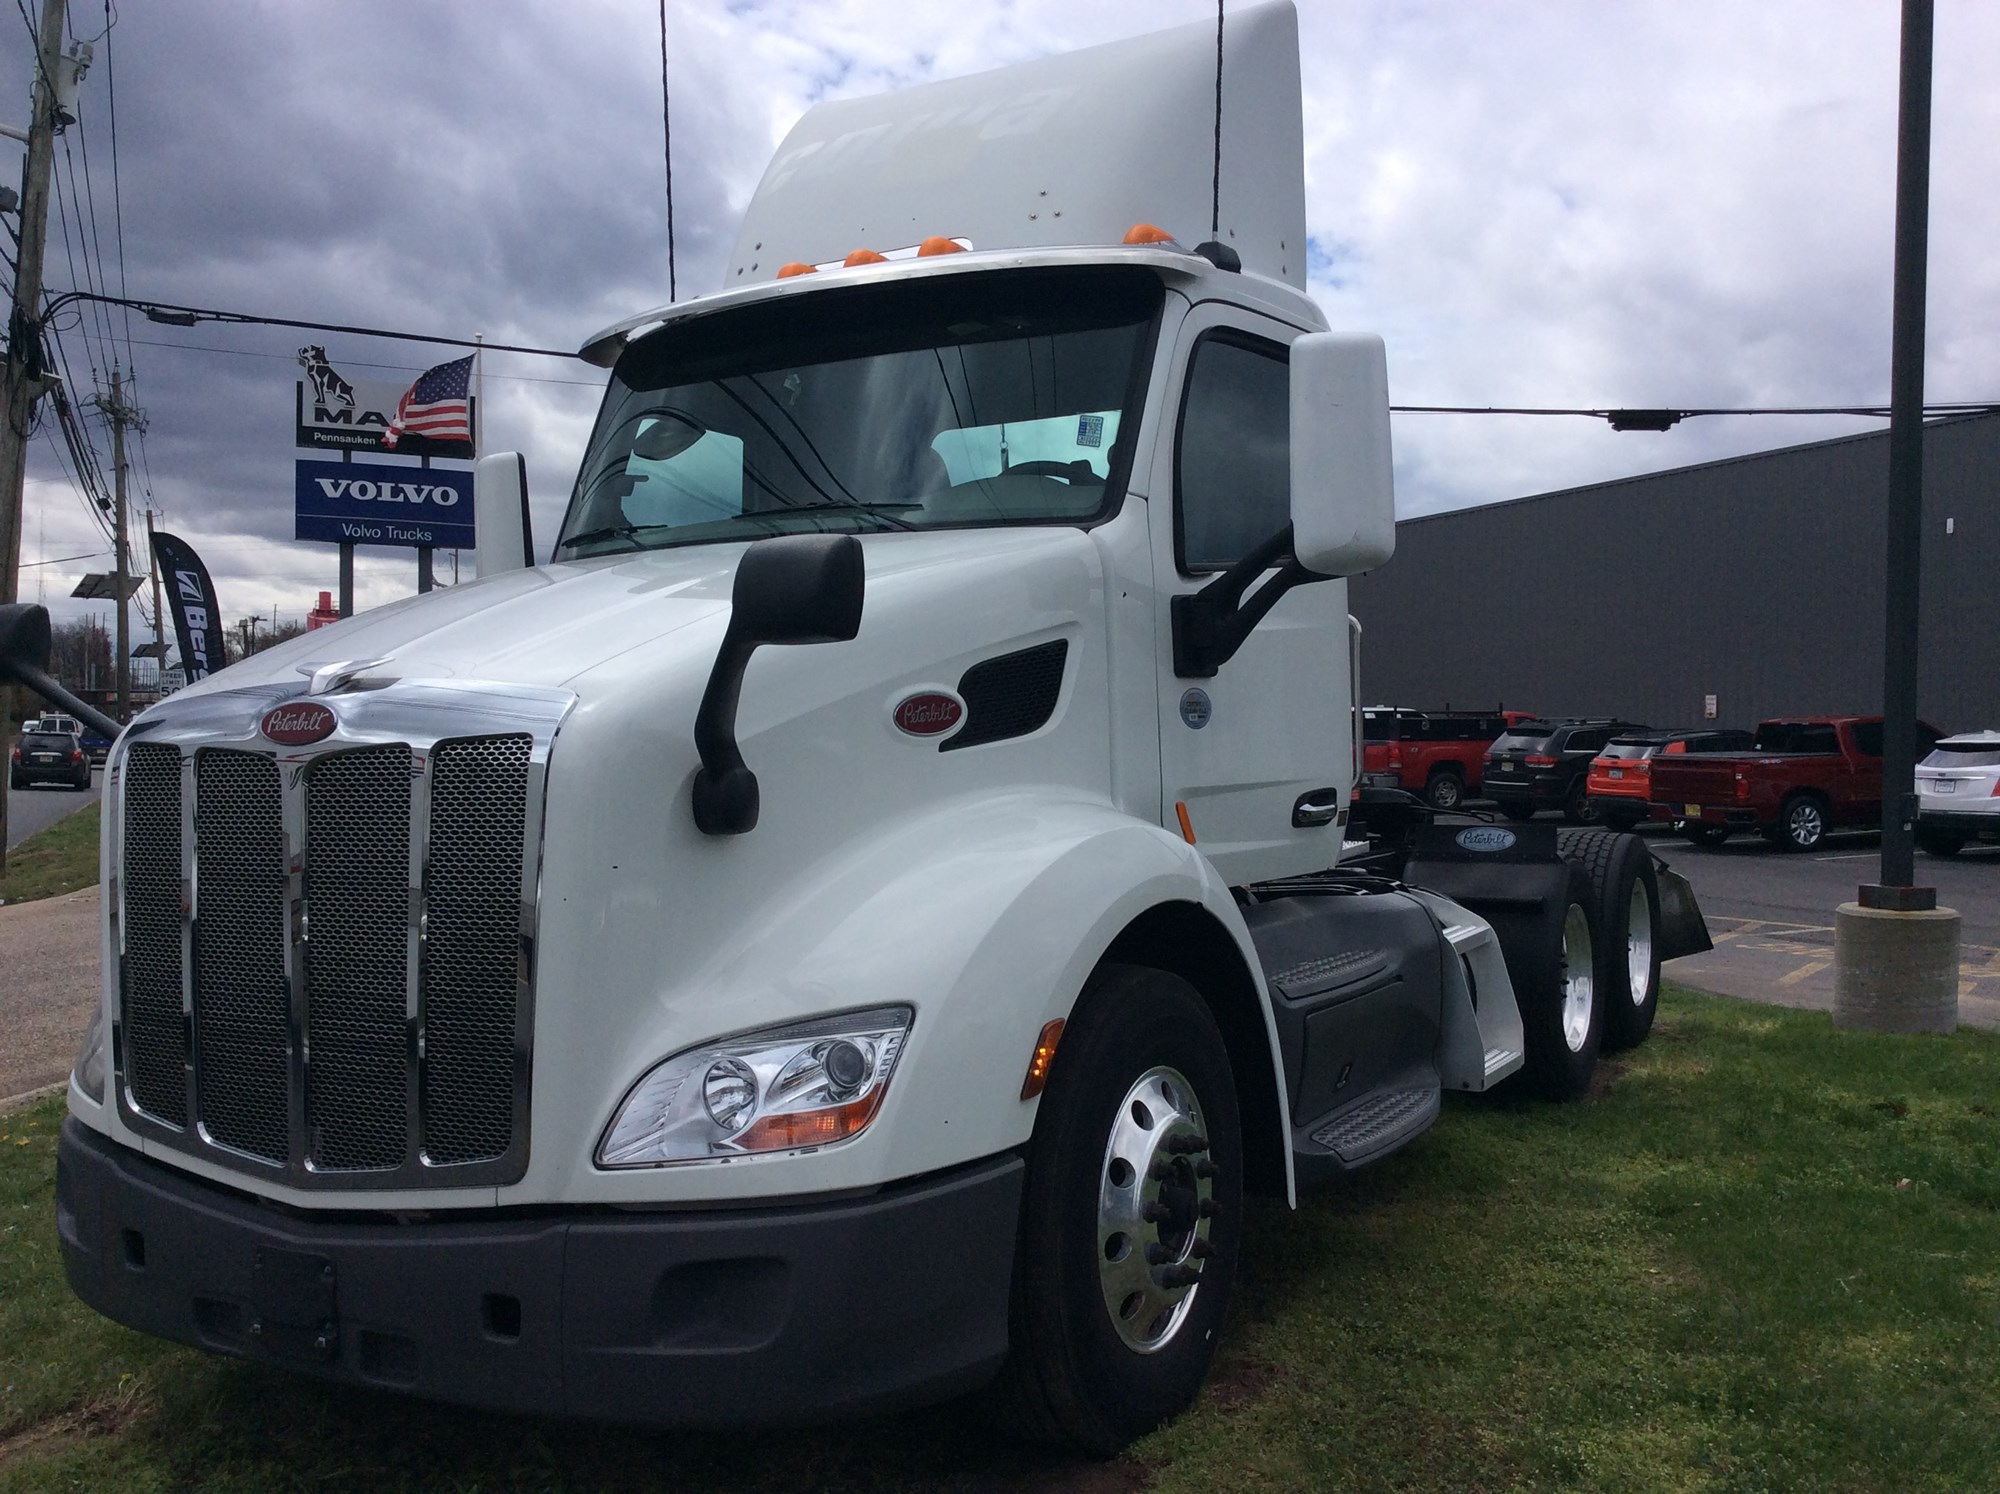 Used Truck Inventory - 1000879 01 - 65